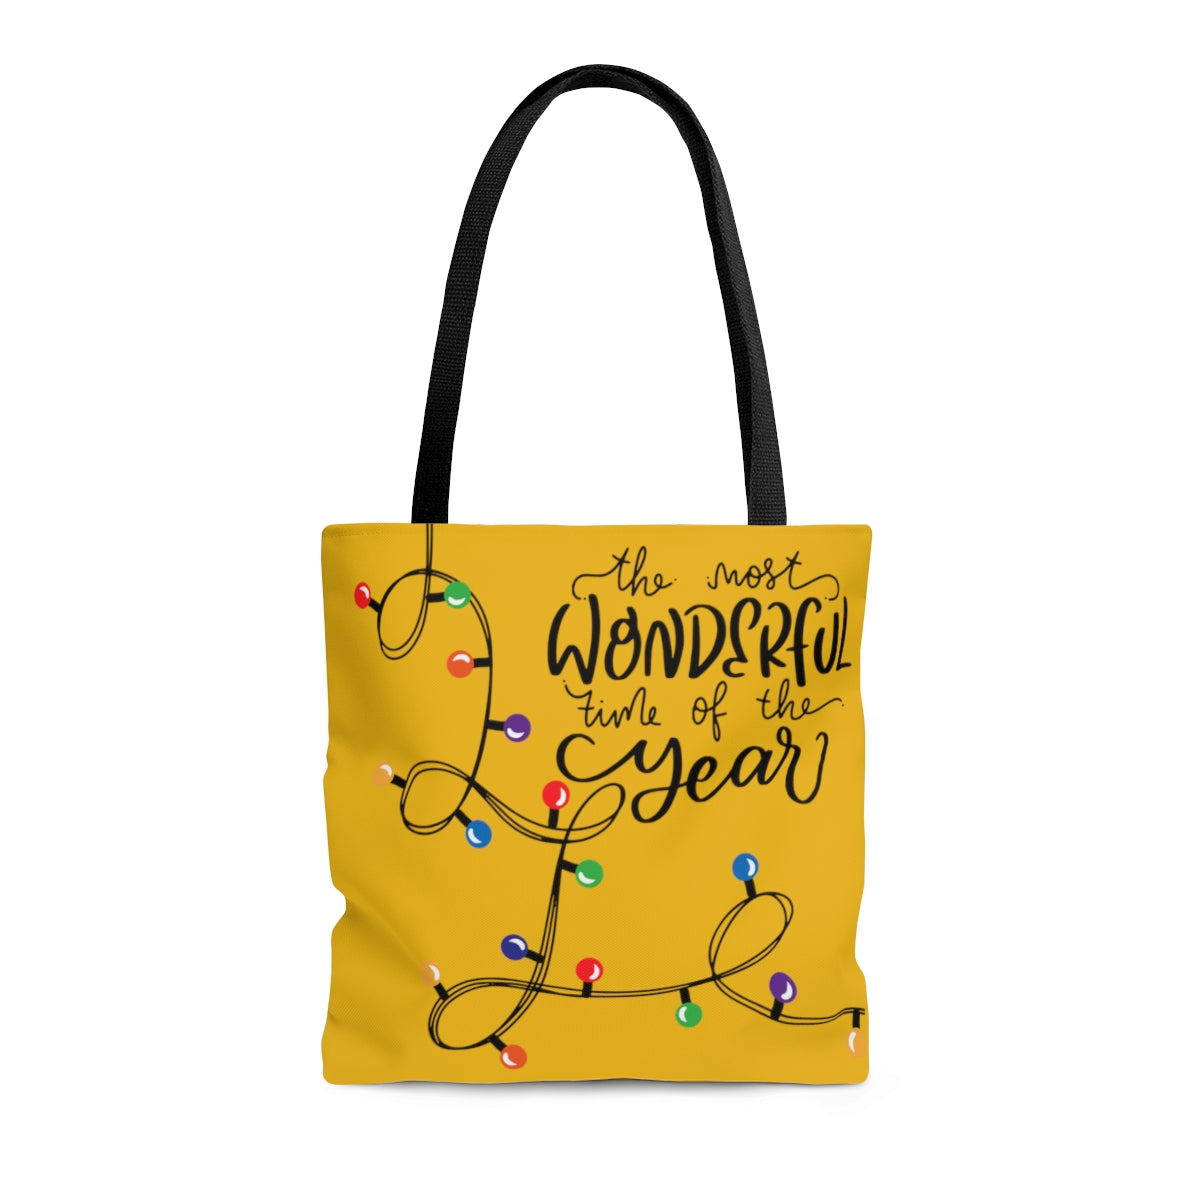 The Most Wonderful Time of Year Gold Tote Bag - Travel Grocery Carry-on